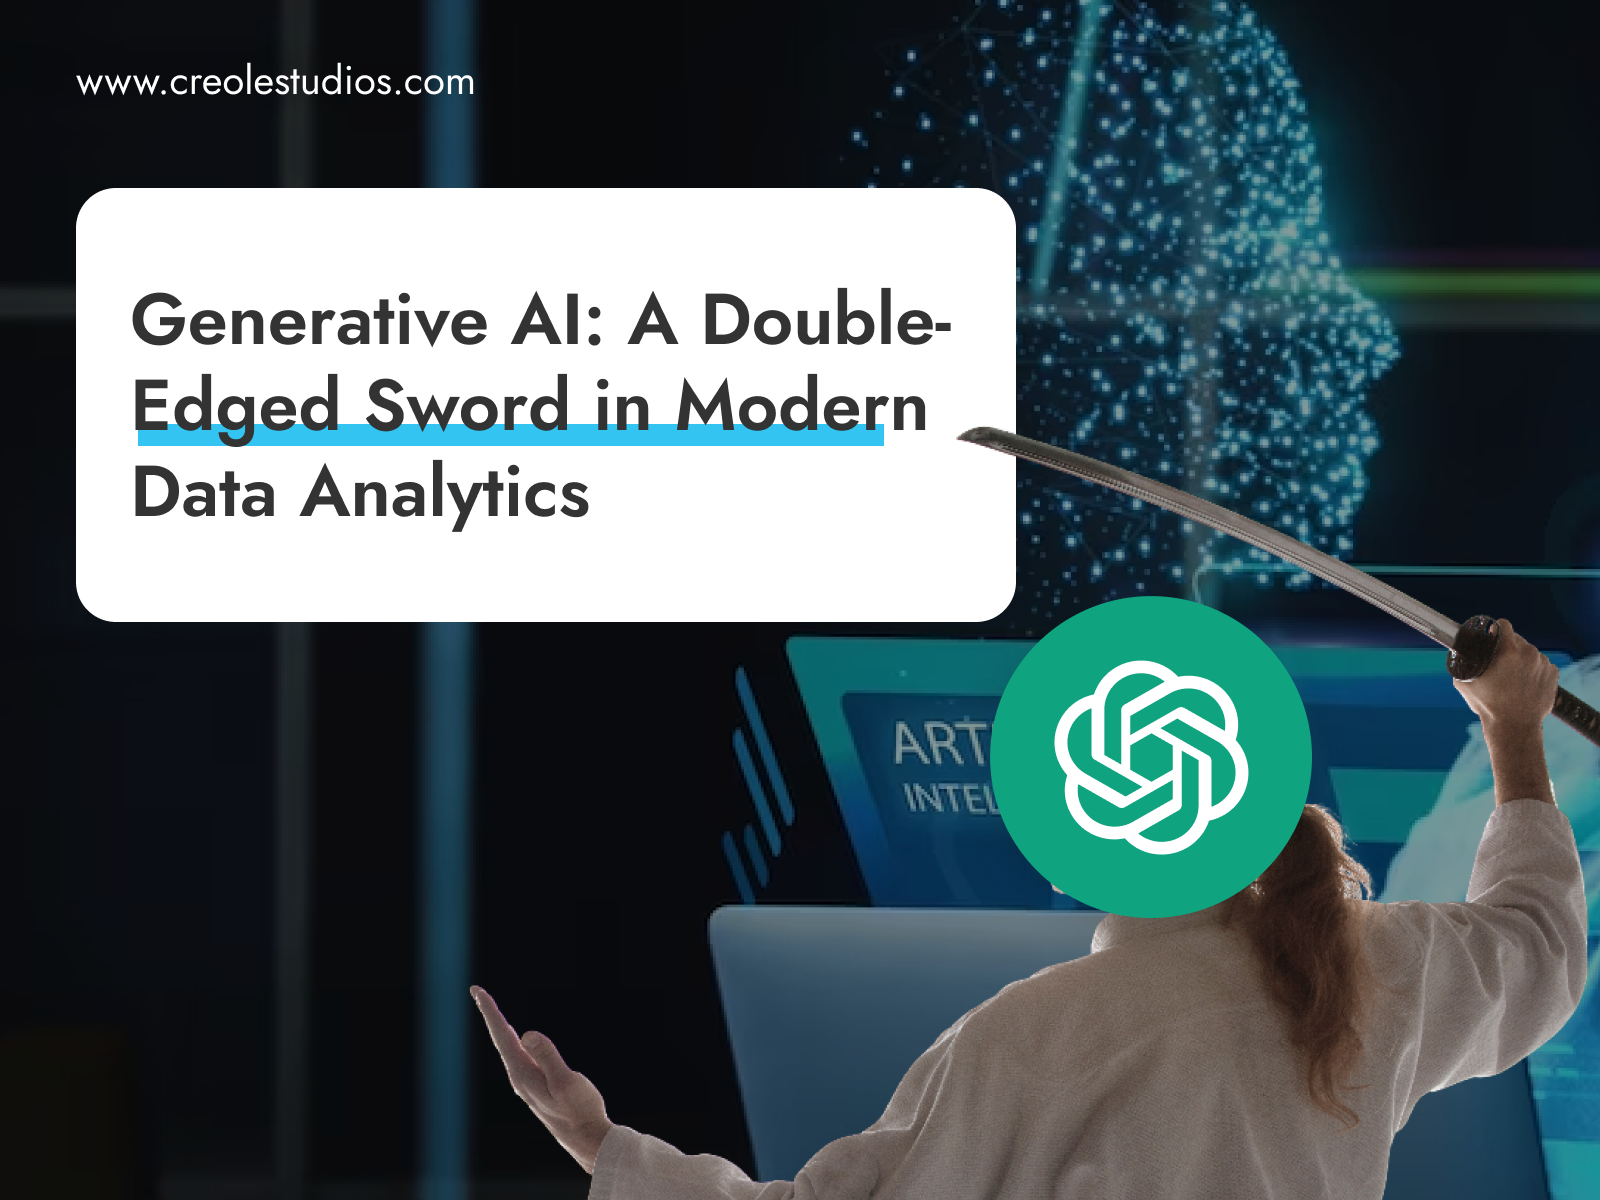 Generative AI: A Double-Edged Sword in Modern Data Analytics